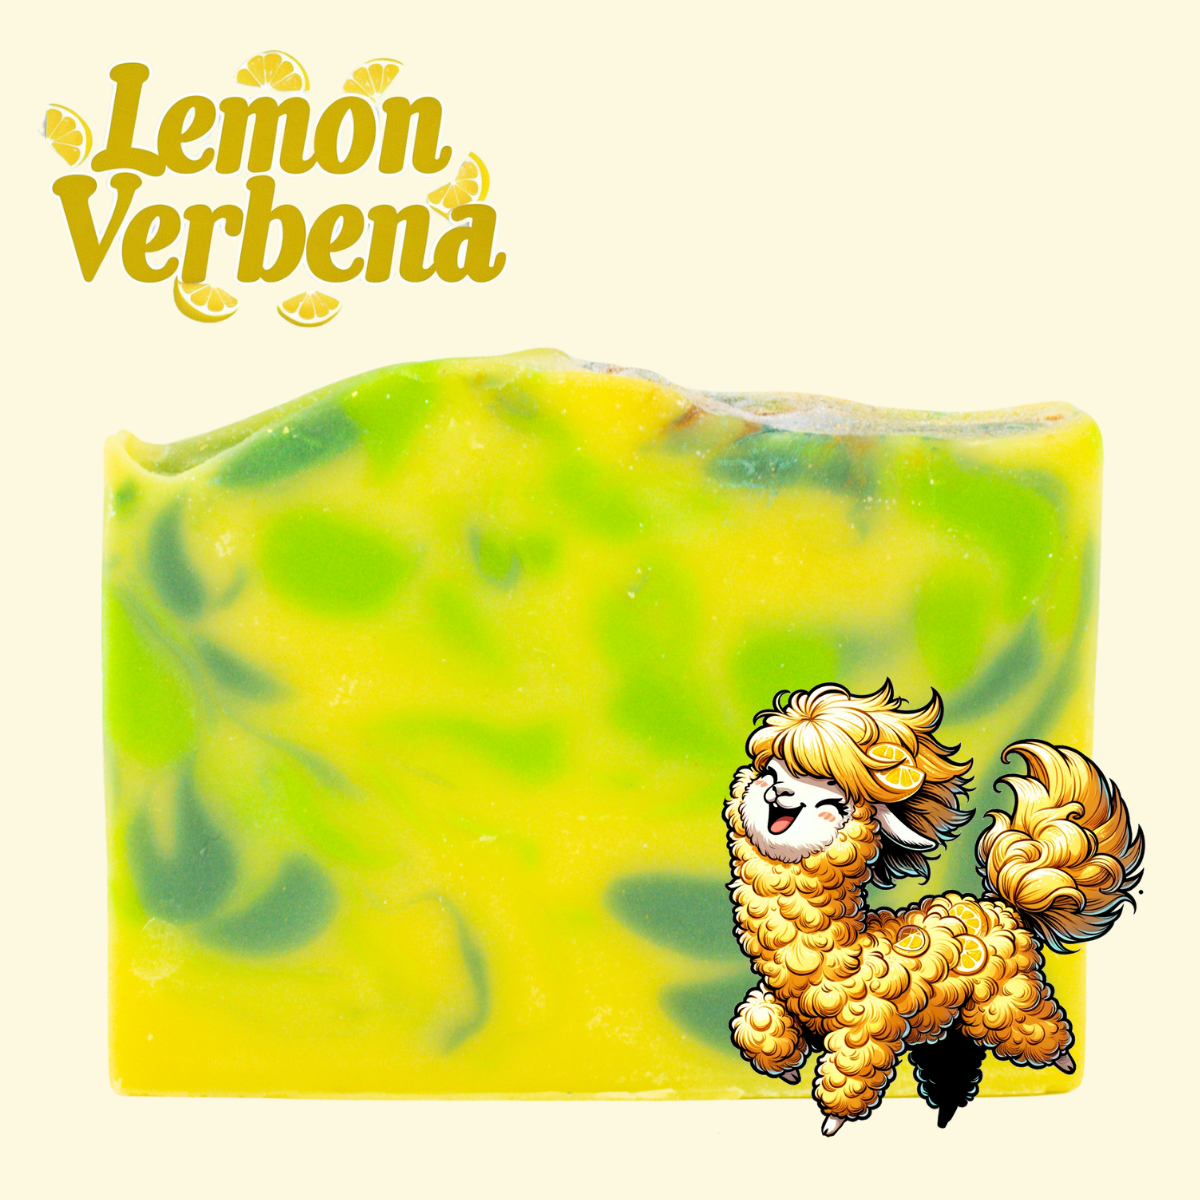 a soap bar with a cartoon of a sheep on it